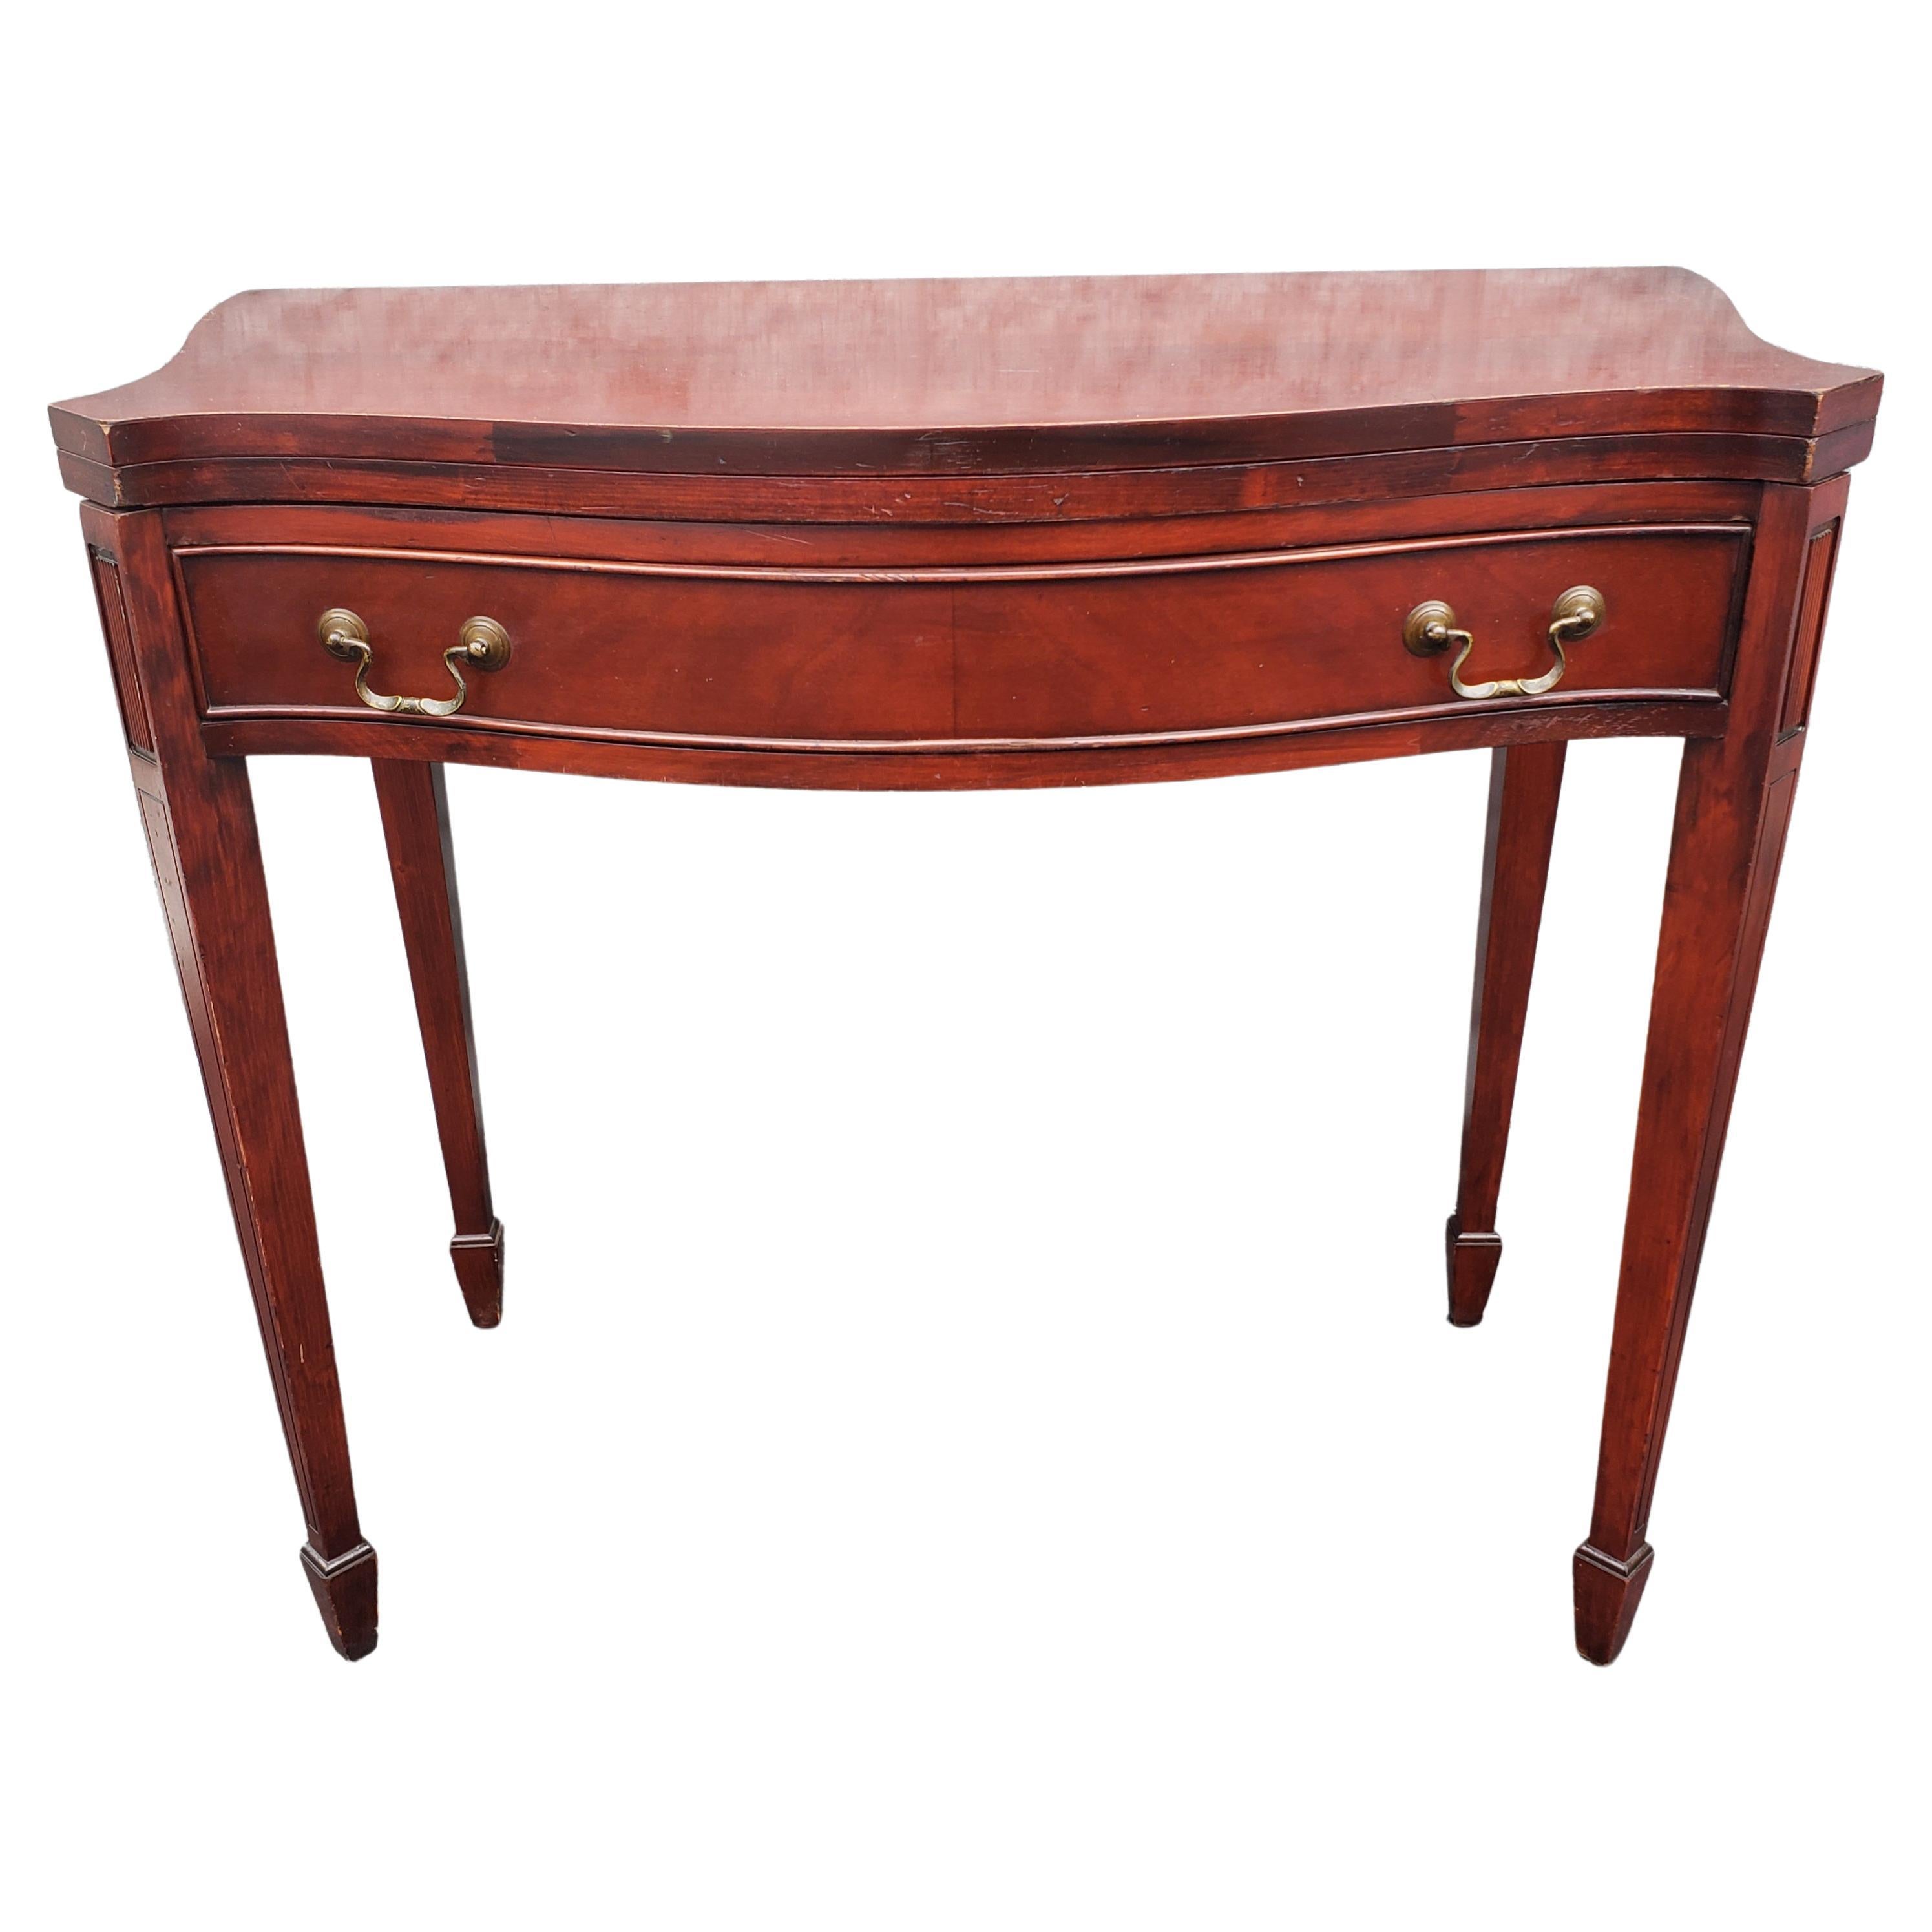 Offered for sale is this quality mahogany side table Shaped top in pure mahogany. Draw to the front against single large dovetailed drawer with brass Chippendale drop handles. Standing on square tapering legs and Offered in good clean vintage